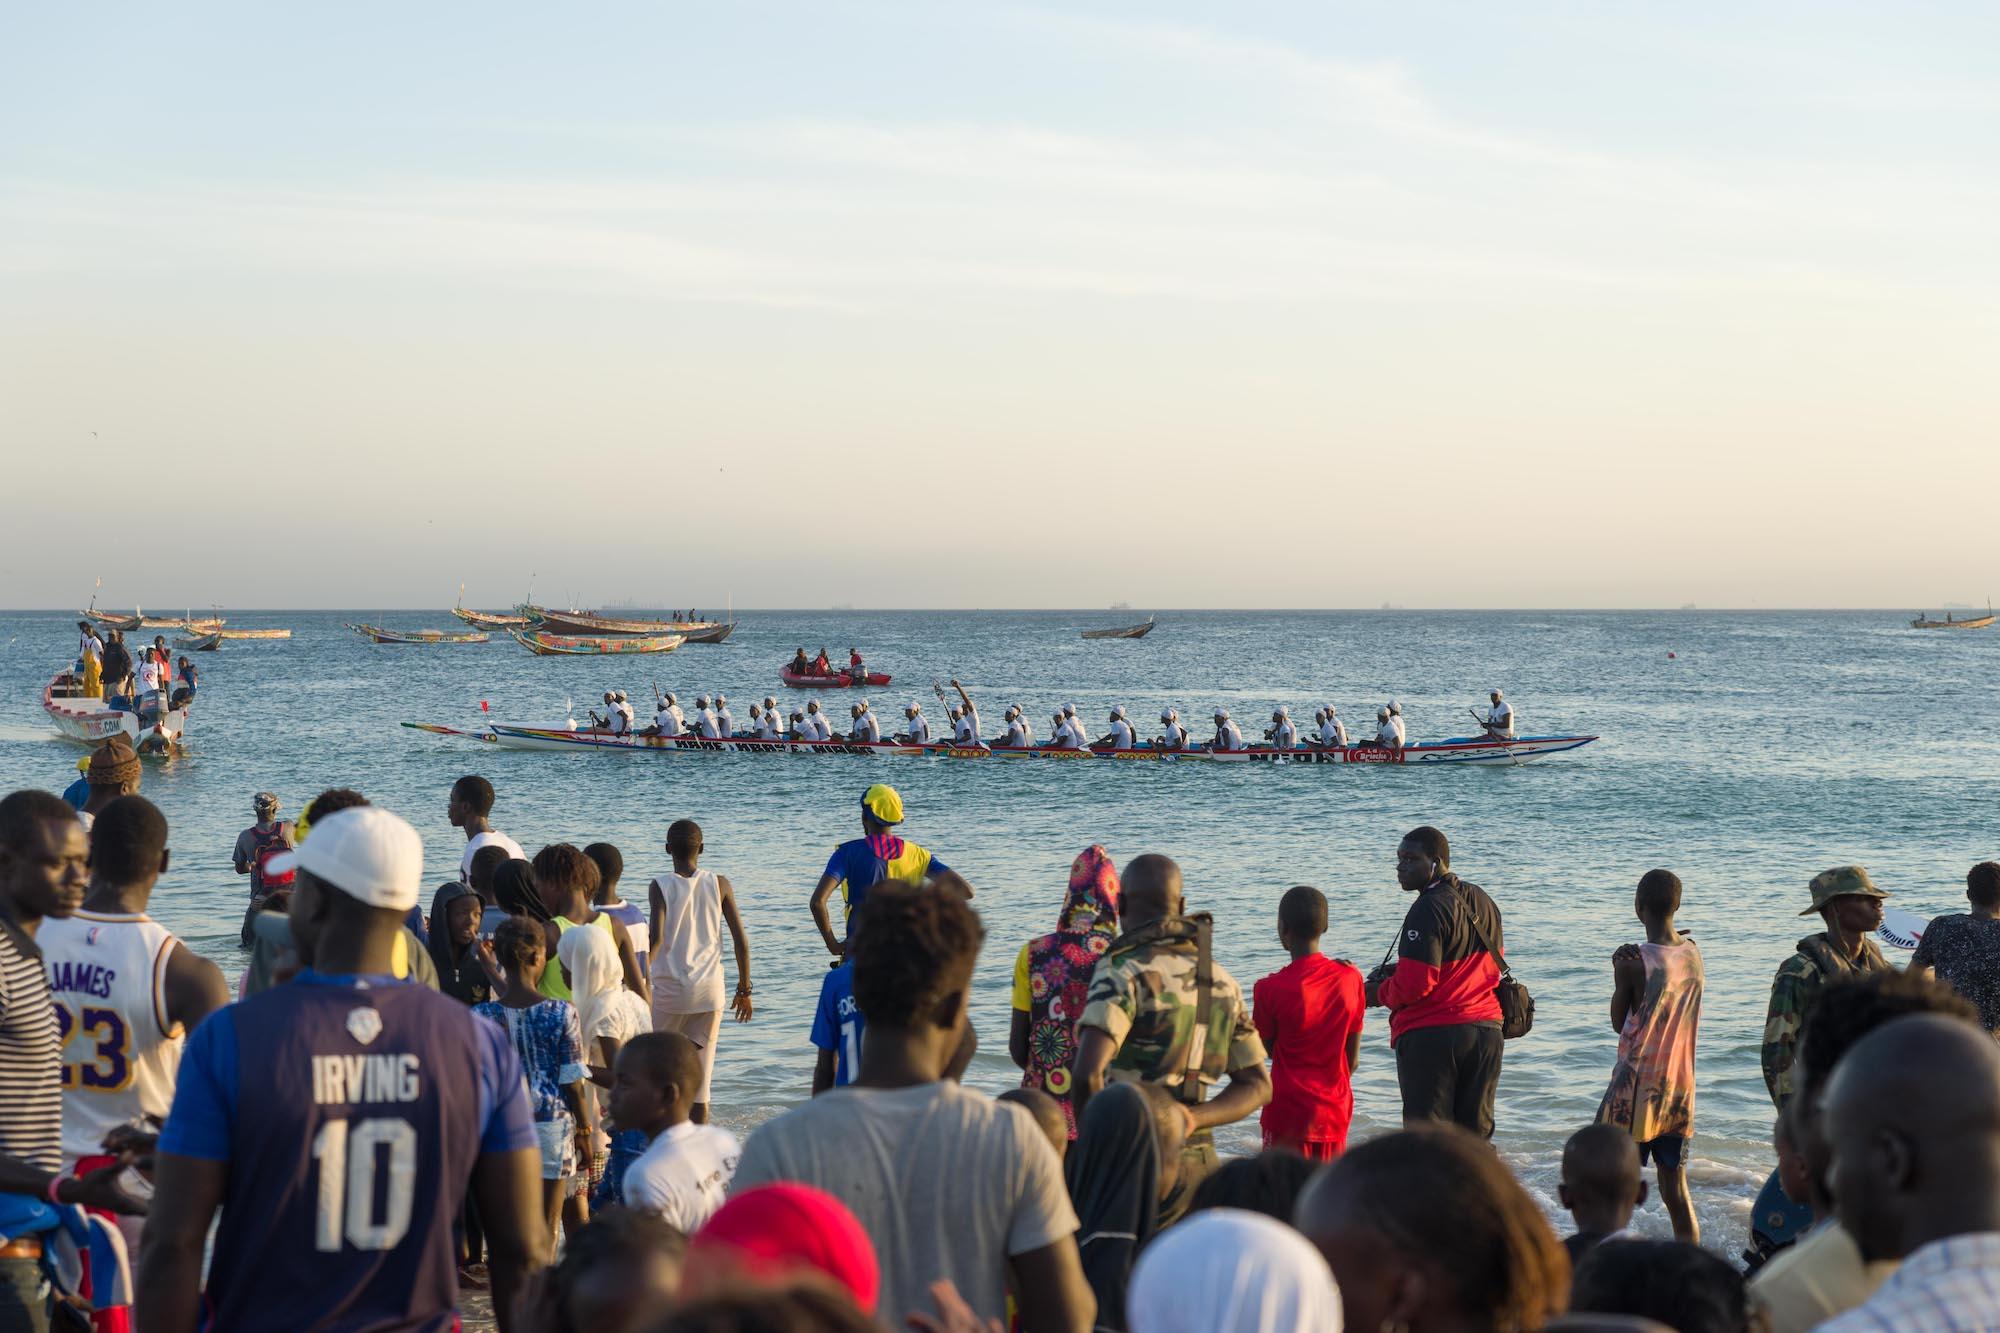 The teams compete in three categories, depending on the size of the boat and rowing team. The...